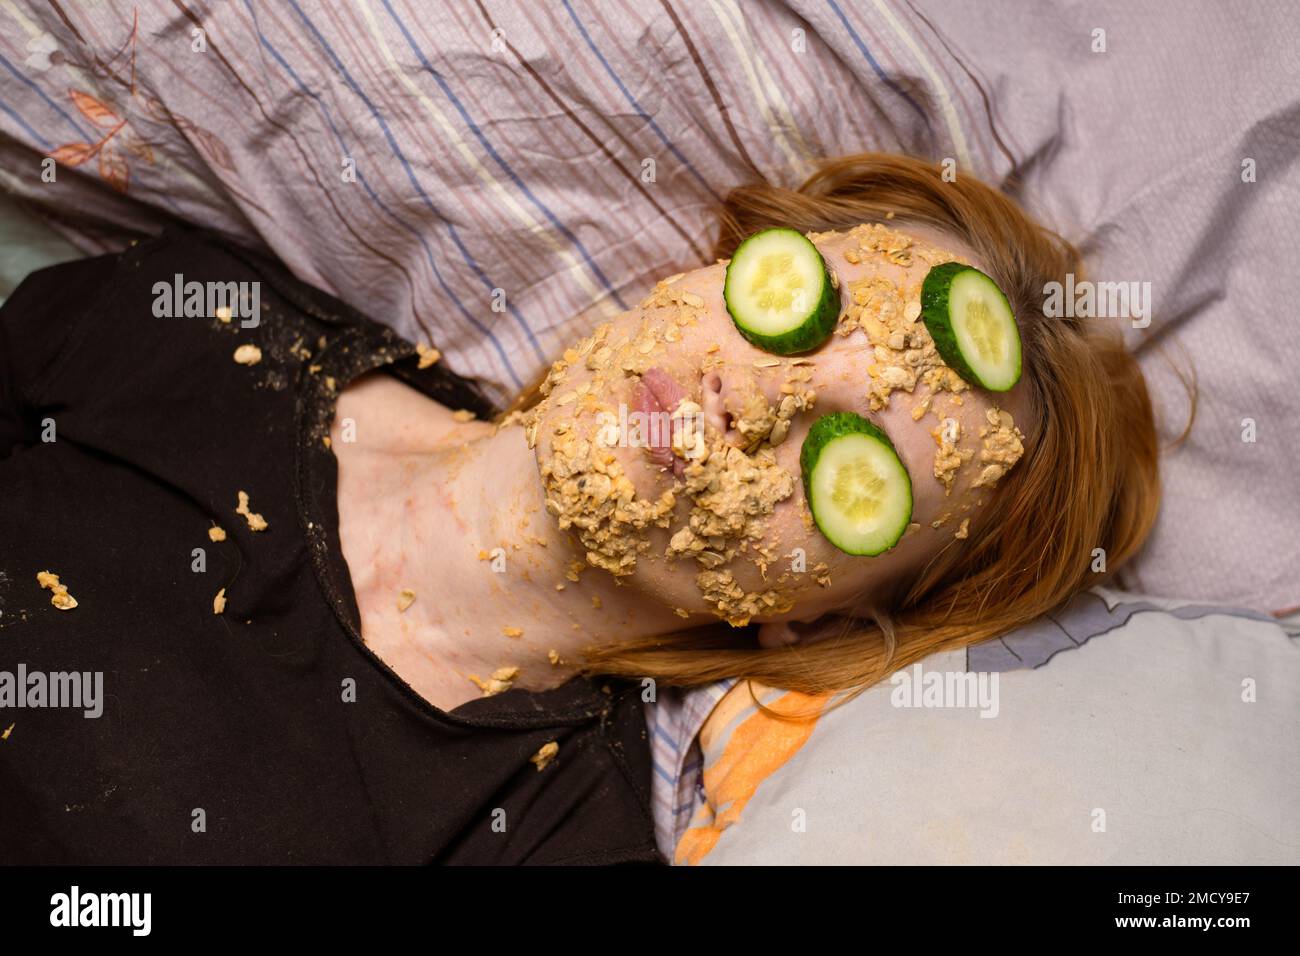 A woman makes a cosmetic mask at home from oatmeal on her face and cucumber. Anti-aging treatments, skin care concept. Stock Photo